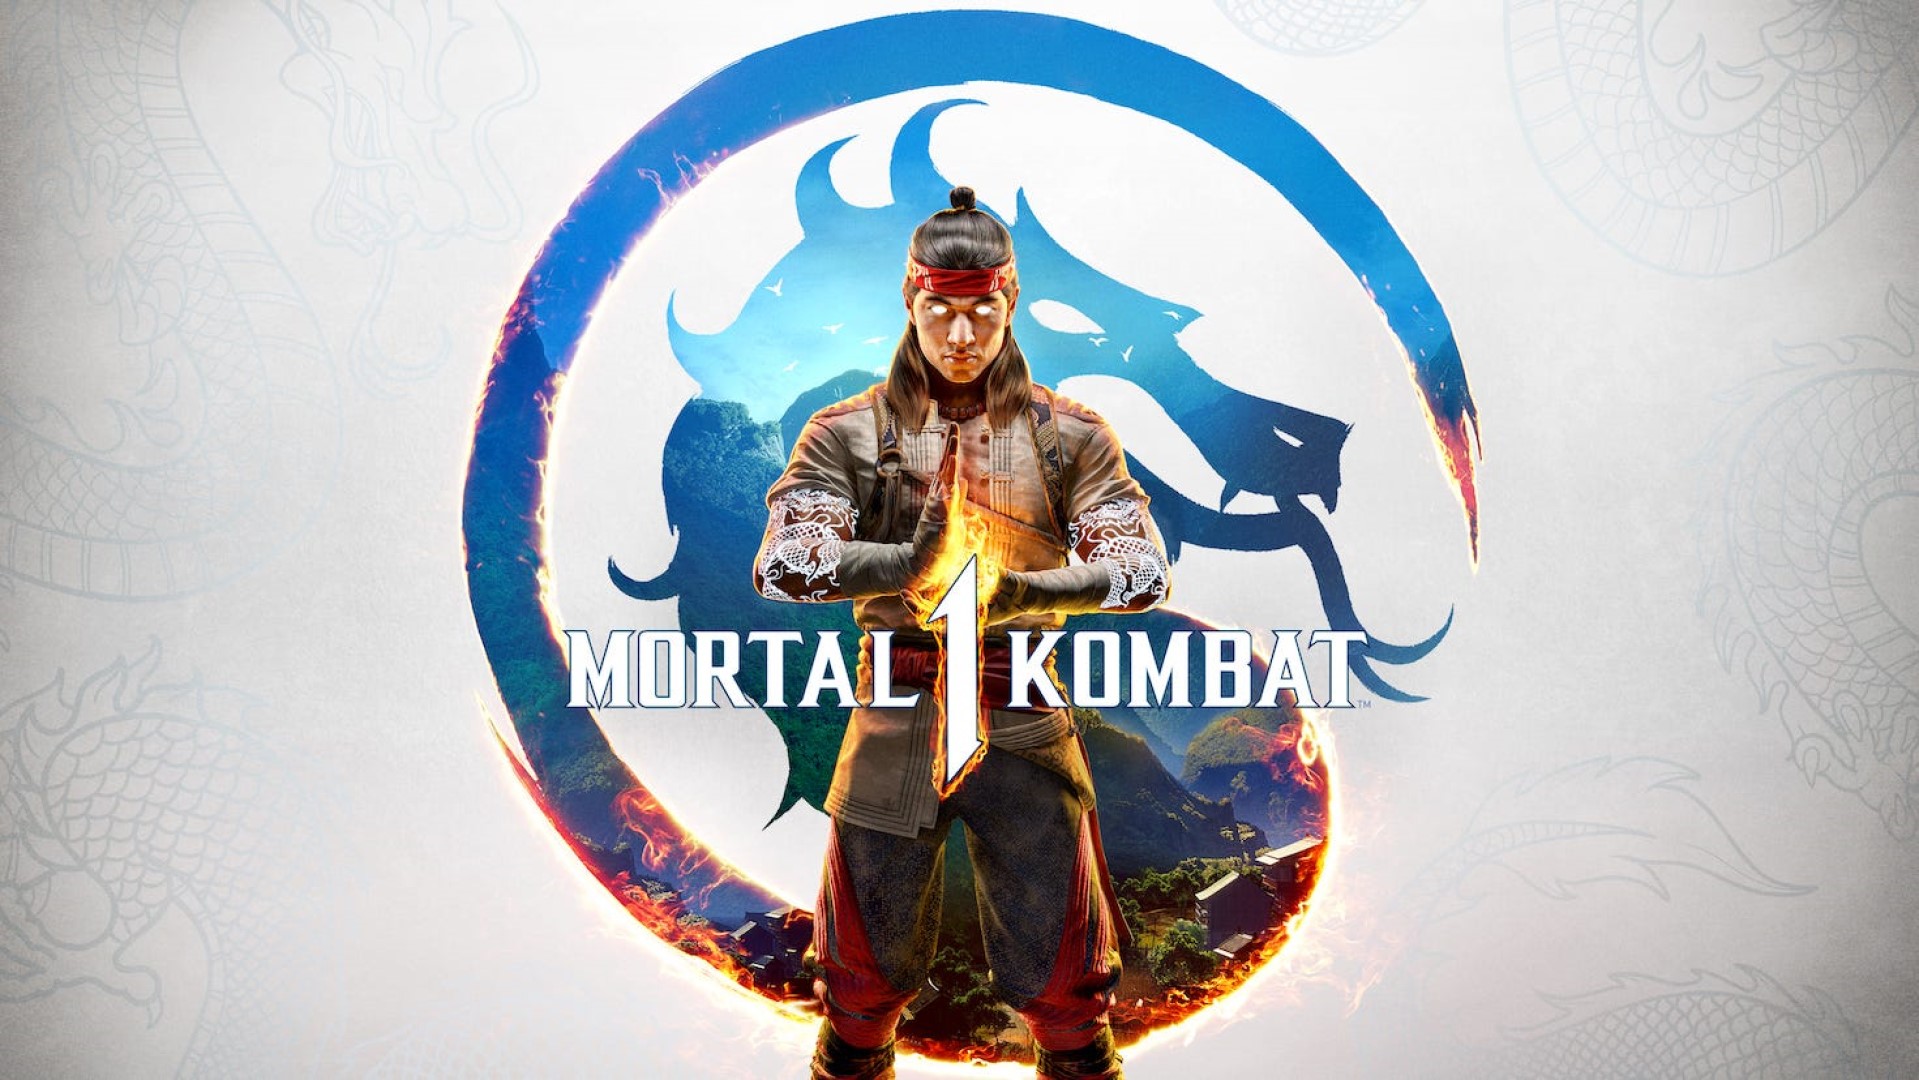 Mortal Kombat 1 – 15 More New Details You Should Know About